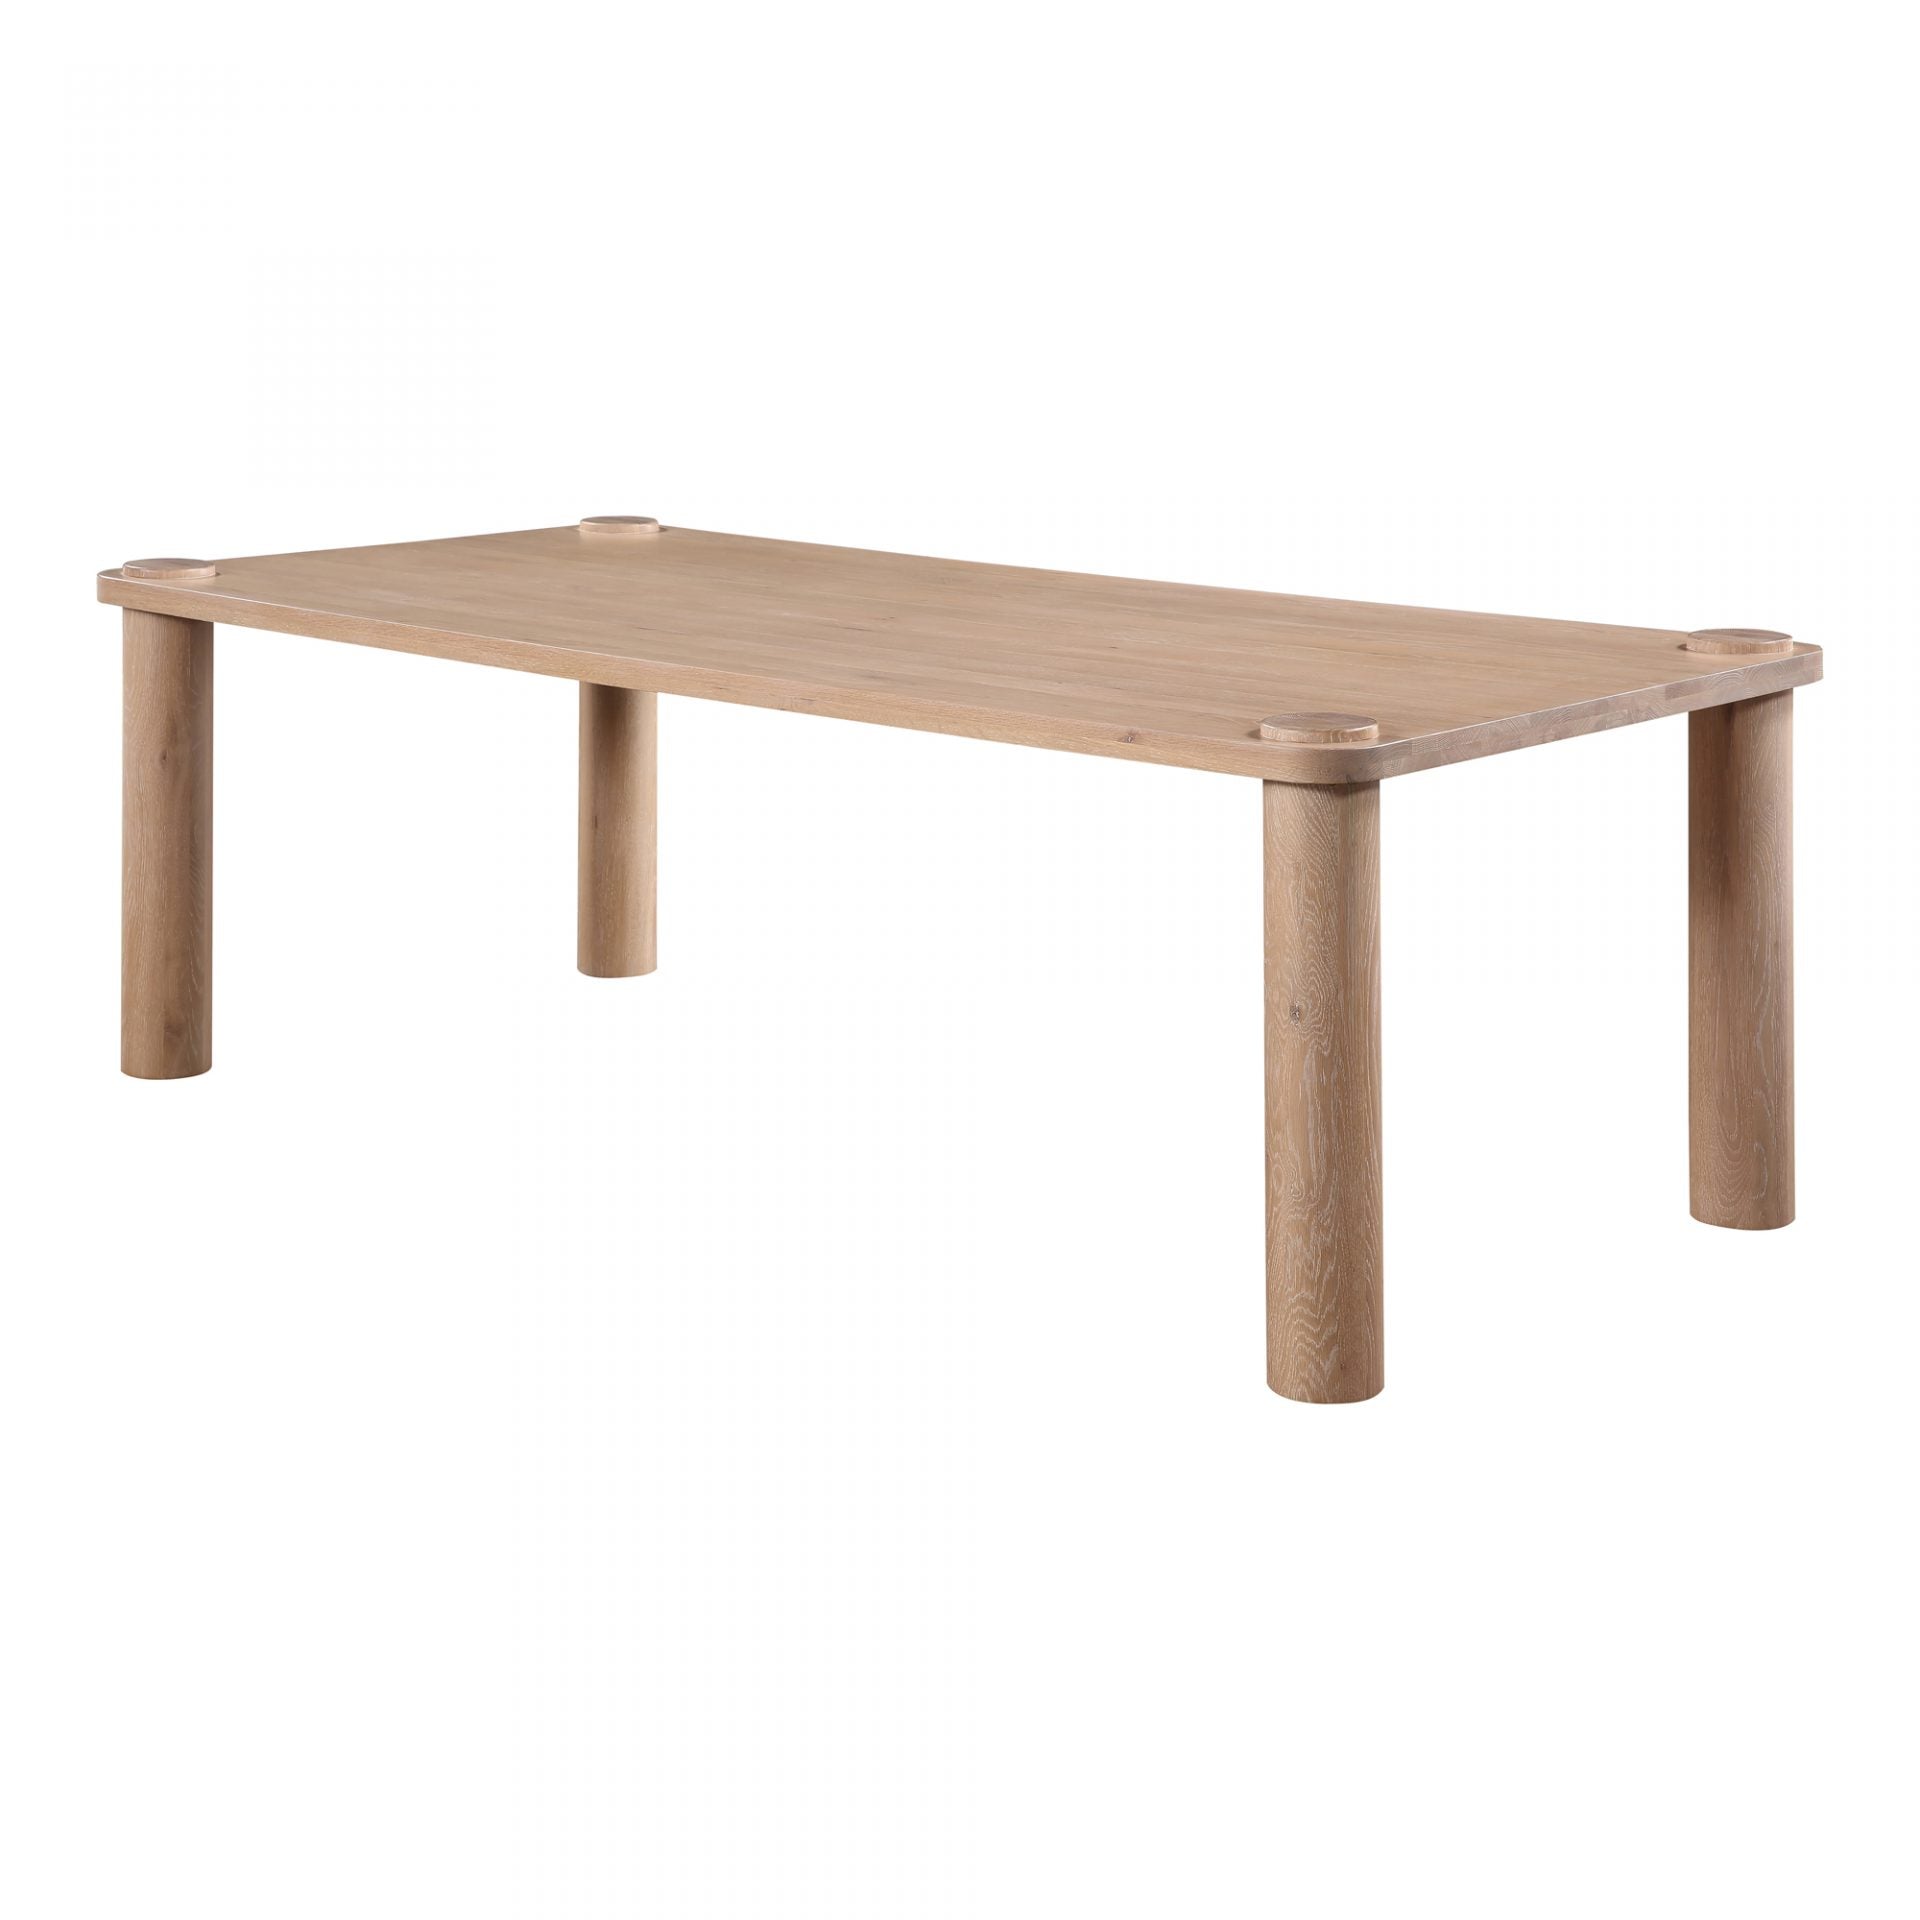 This Century Dining Table is filled with bright, organic energy. Made from solid white oak, this beautifully crafted hardwood table is a modern focal point to your dining room or kitchen area!  Dimensions: 88"W x 42"D x 30"H Materials:  Solid White Oak